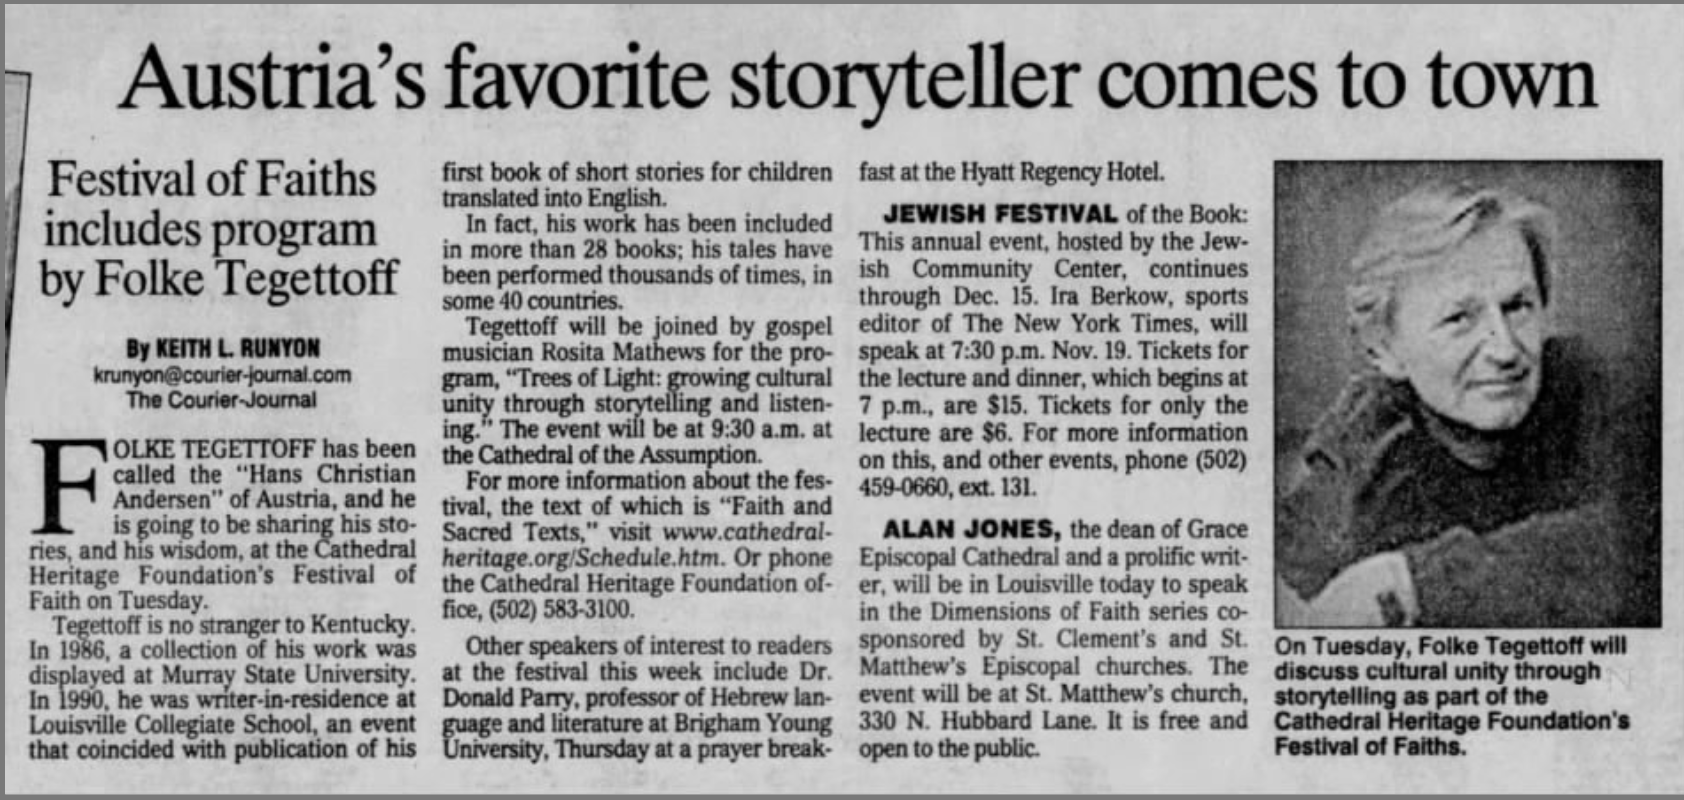 Runyon, Keith. “Austria's Favorite Storyteller Comes to Town.” The Courier-Journal, 10 Nov. 2002, p. 93.